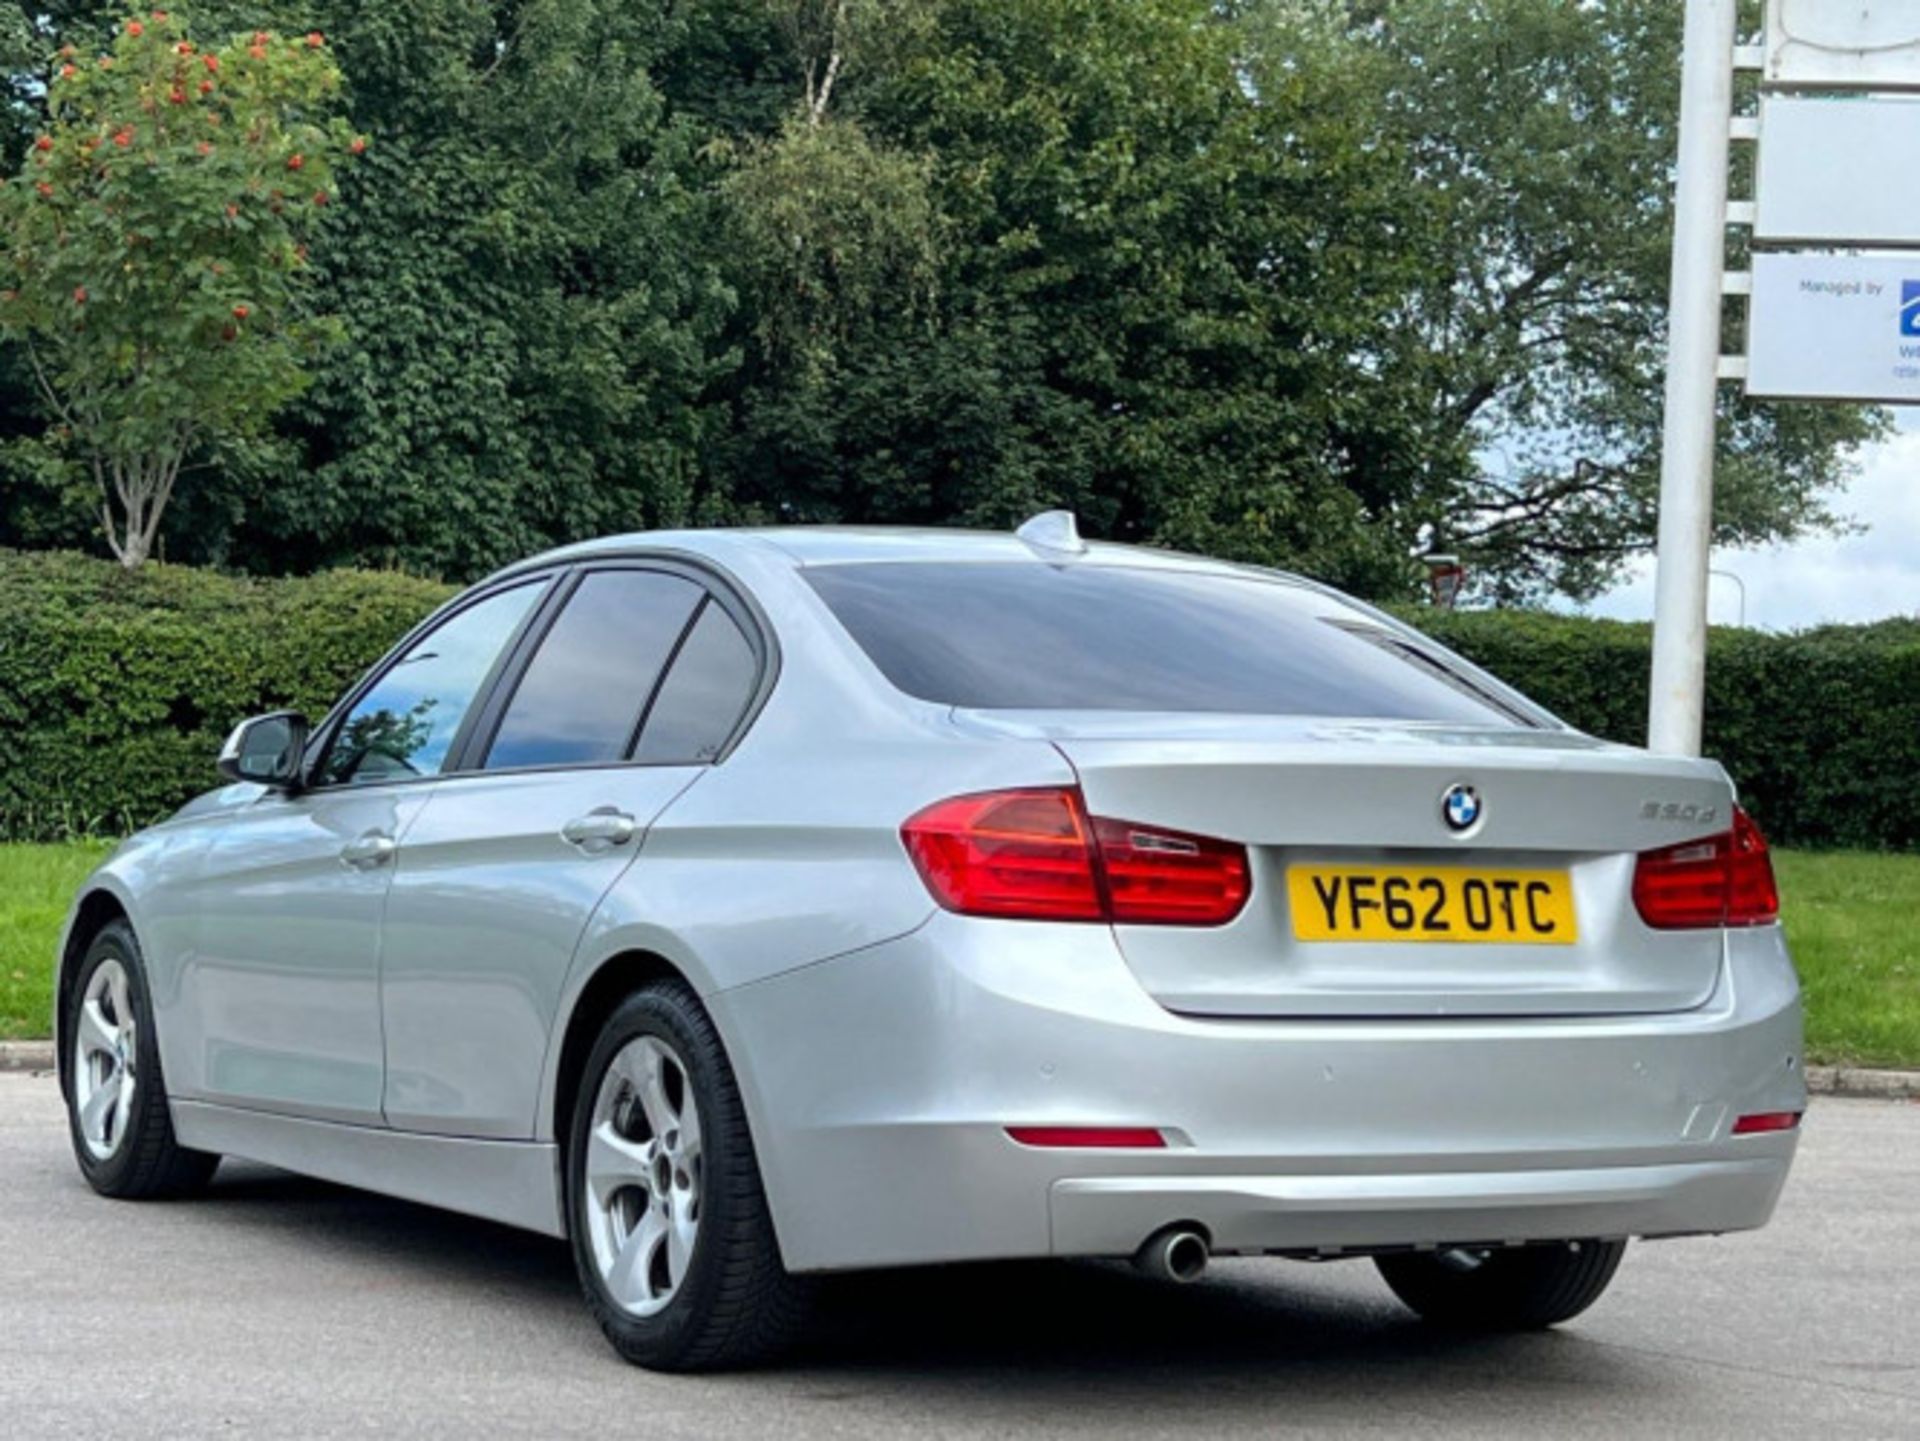 BMW 3 SERIES 2.0 DIESEL ED START STOP - A WELL-MAINTAINED GEM >>--NO VAT ON HAMMER--<< - Image 227 of 229